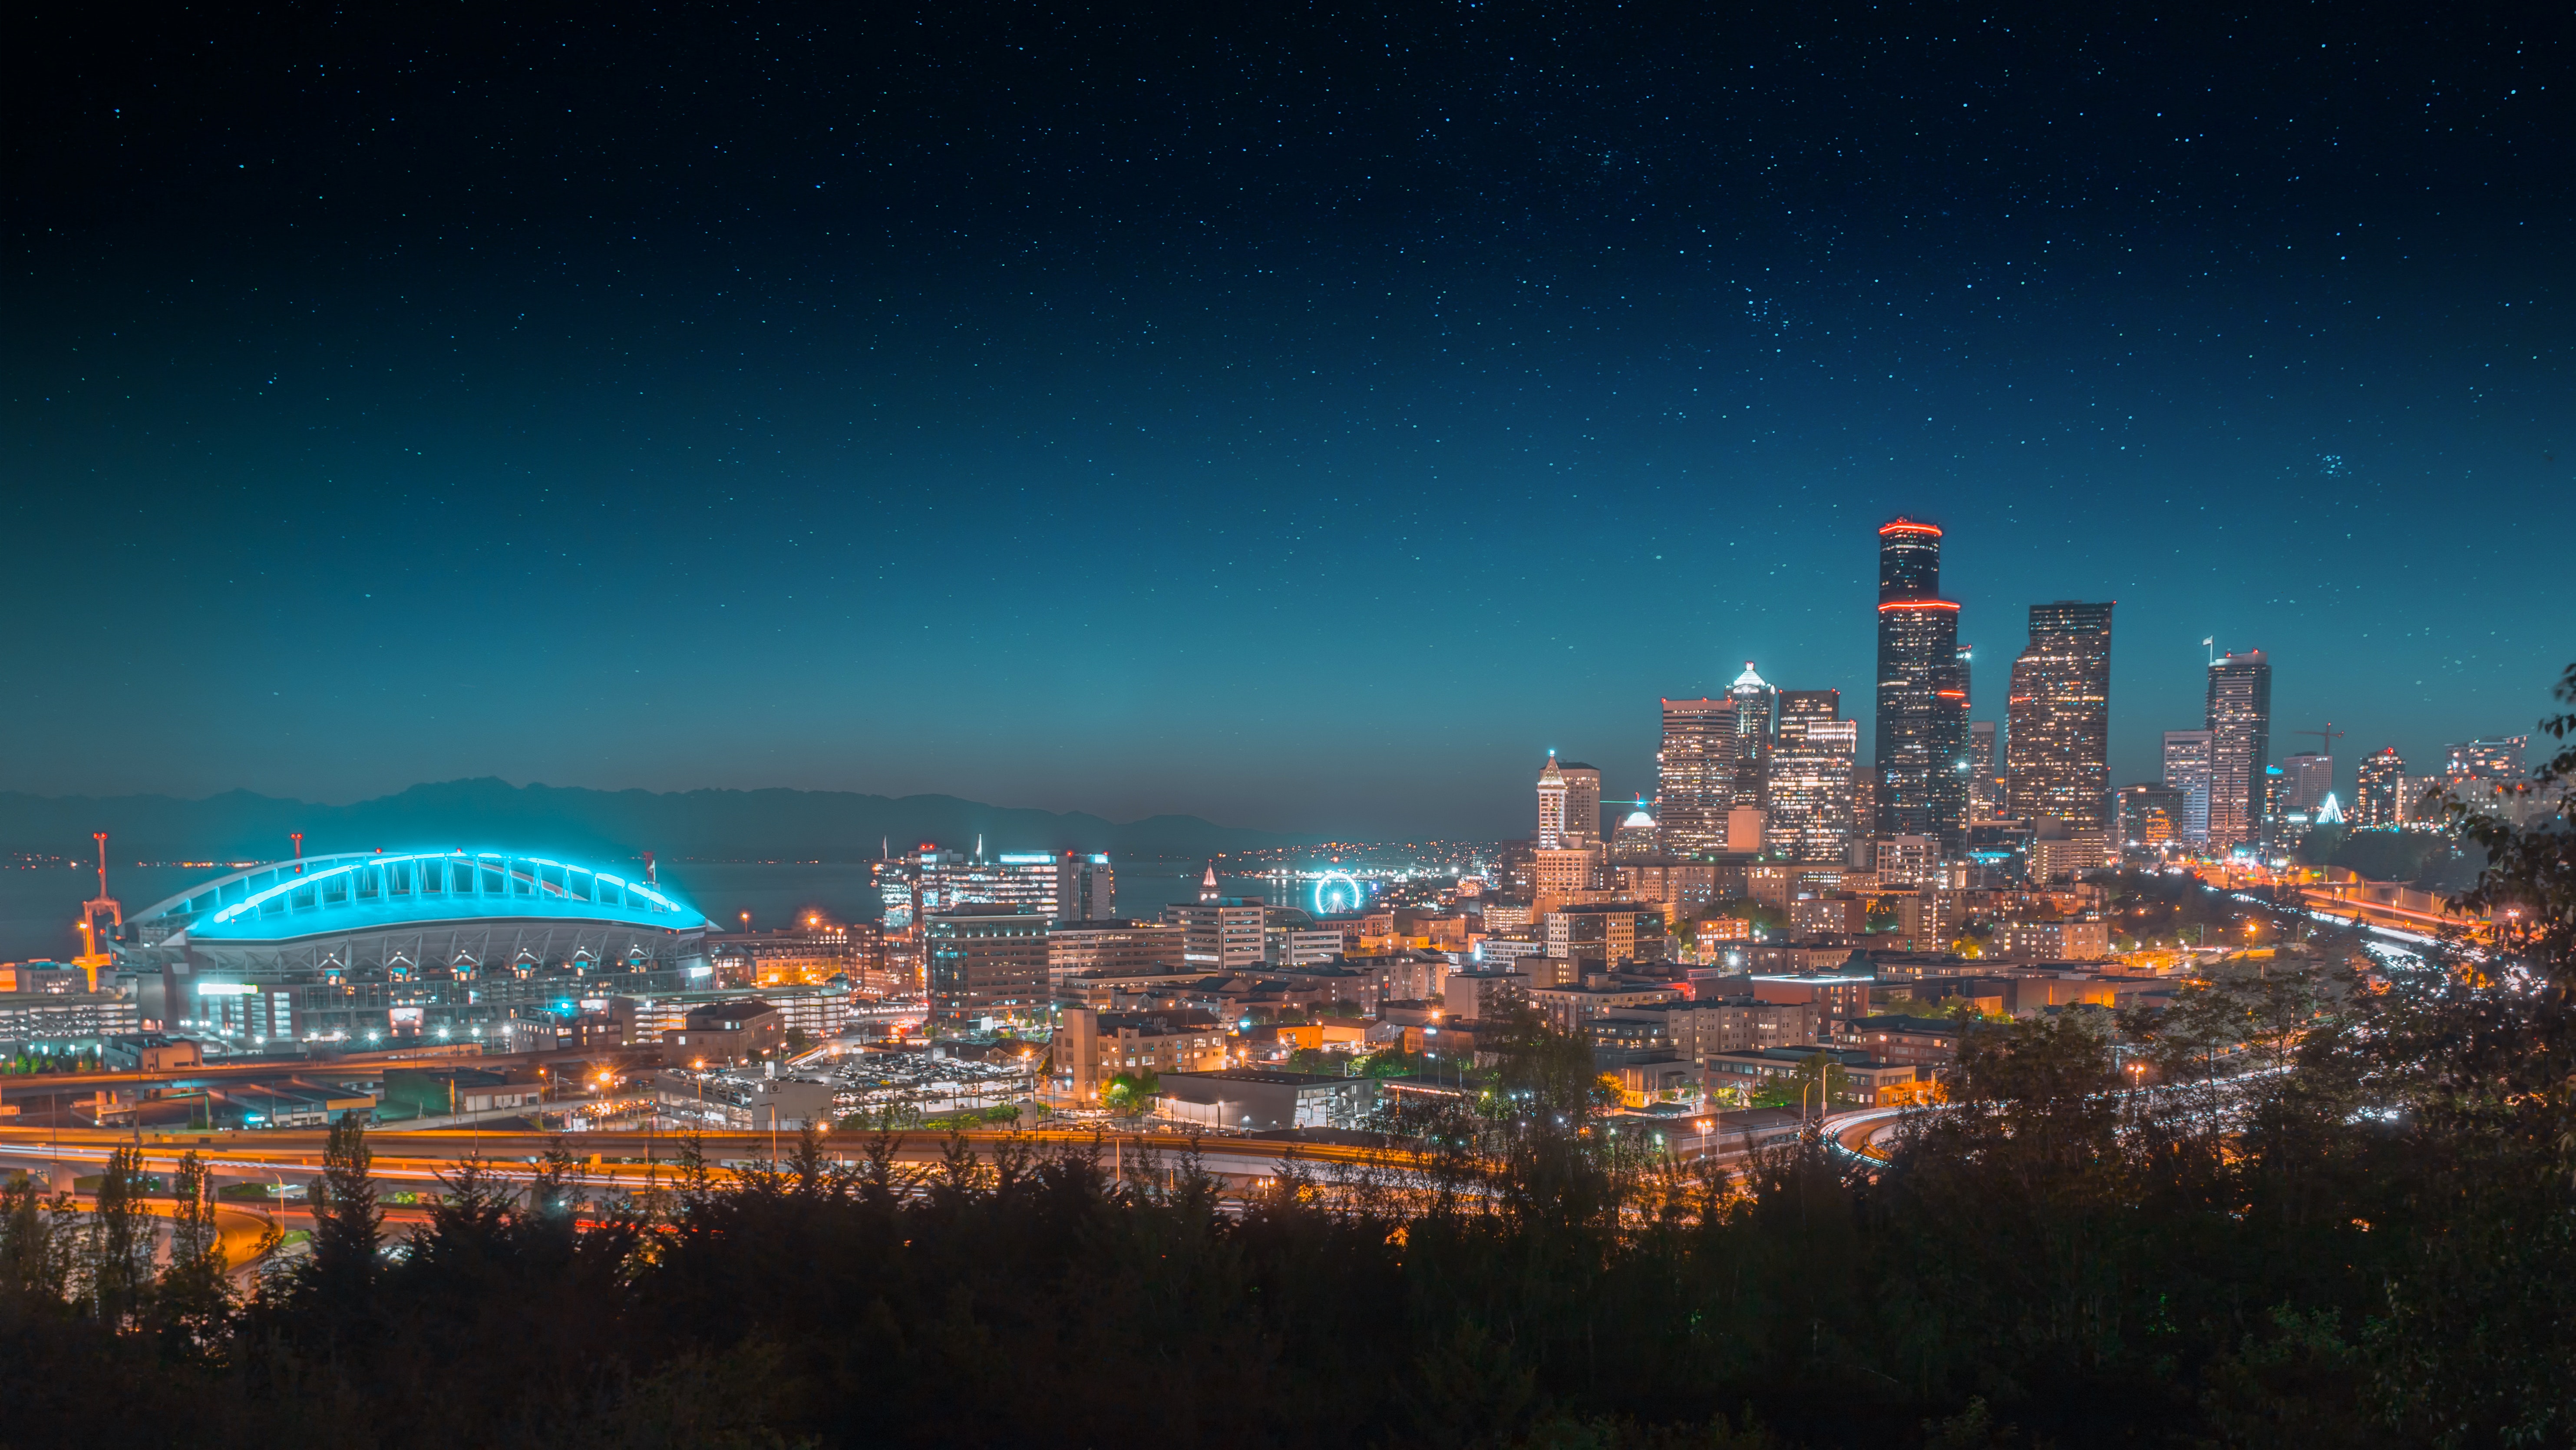 Full HD Wallpaper cities, architecture, starry sky, night city, city lights, panorama